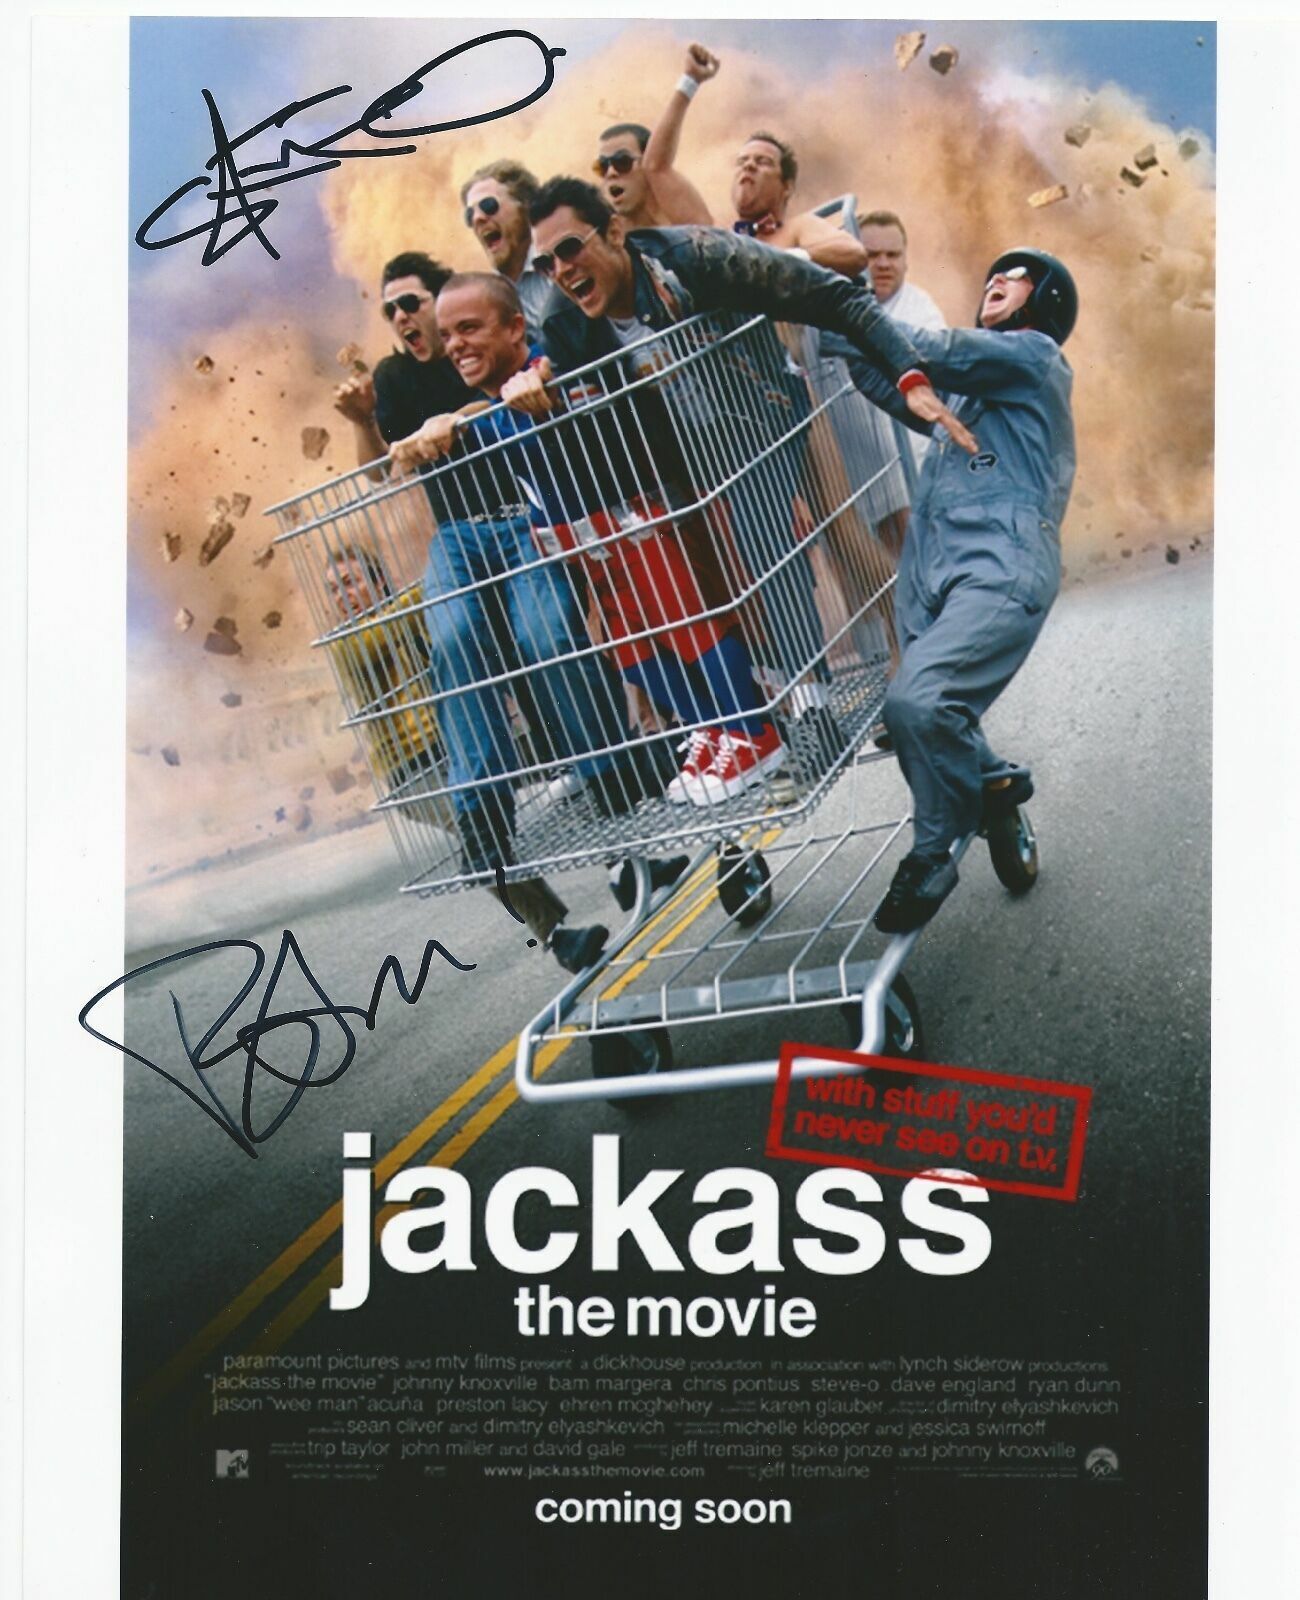 Steve-O / Bam Margera Autographed Signed 8x10 Photo Poster painting ( Jackass ) REPRINT